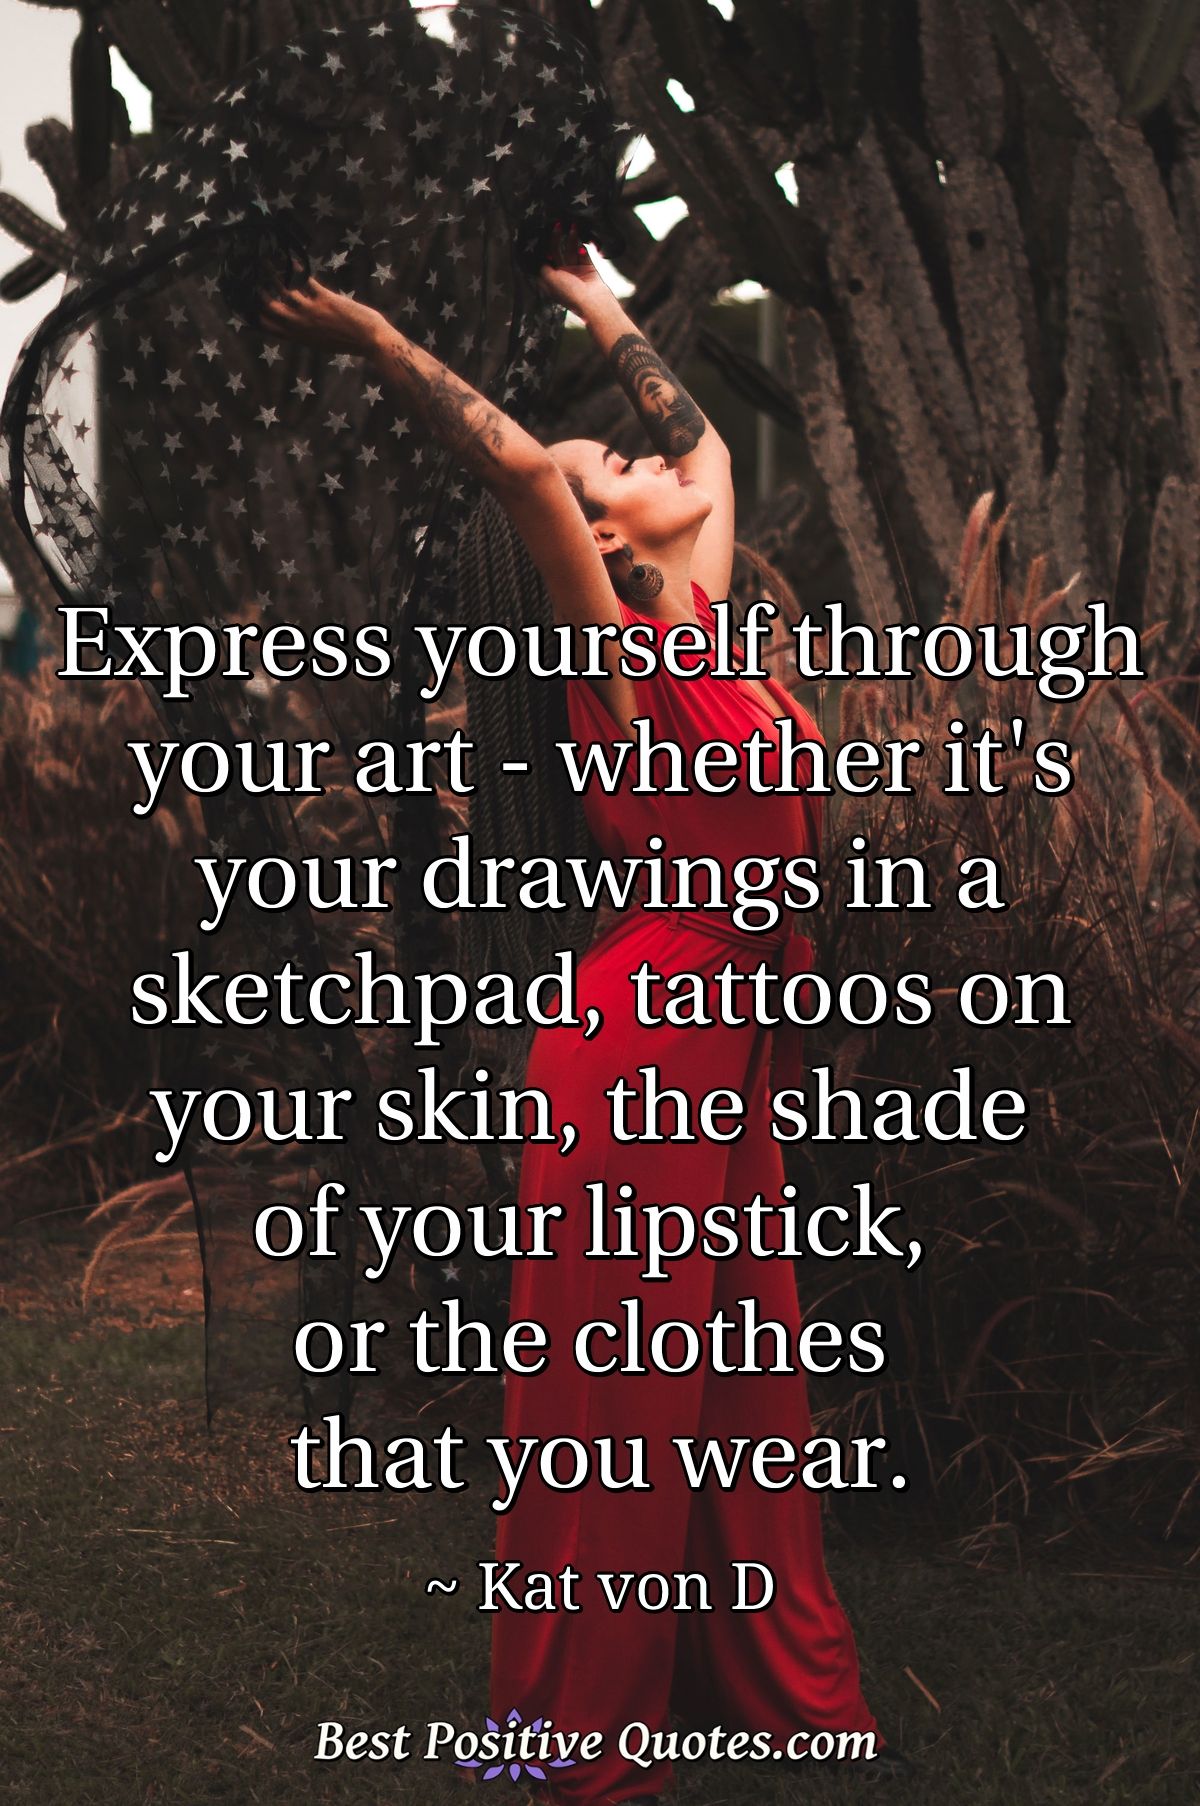 Express yourself through your art - whether it's your drawings in a sketchpad, tattoos on your skin, the shade of your lipstick, or the clothes that you wear. - Kat von D